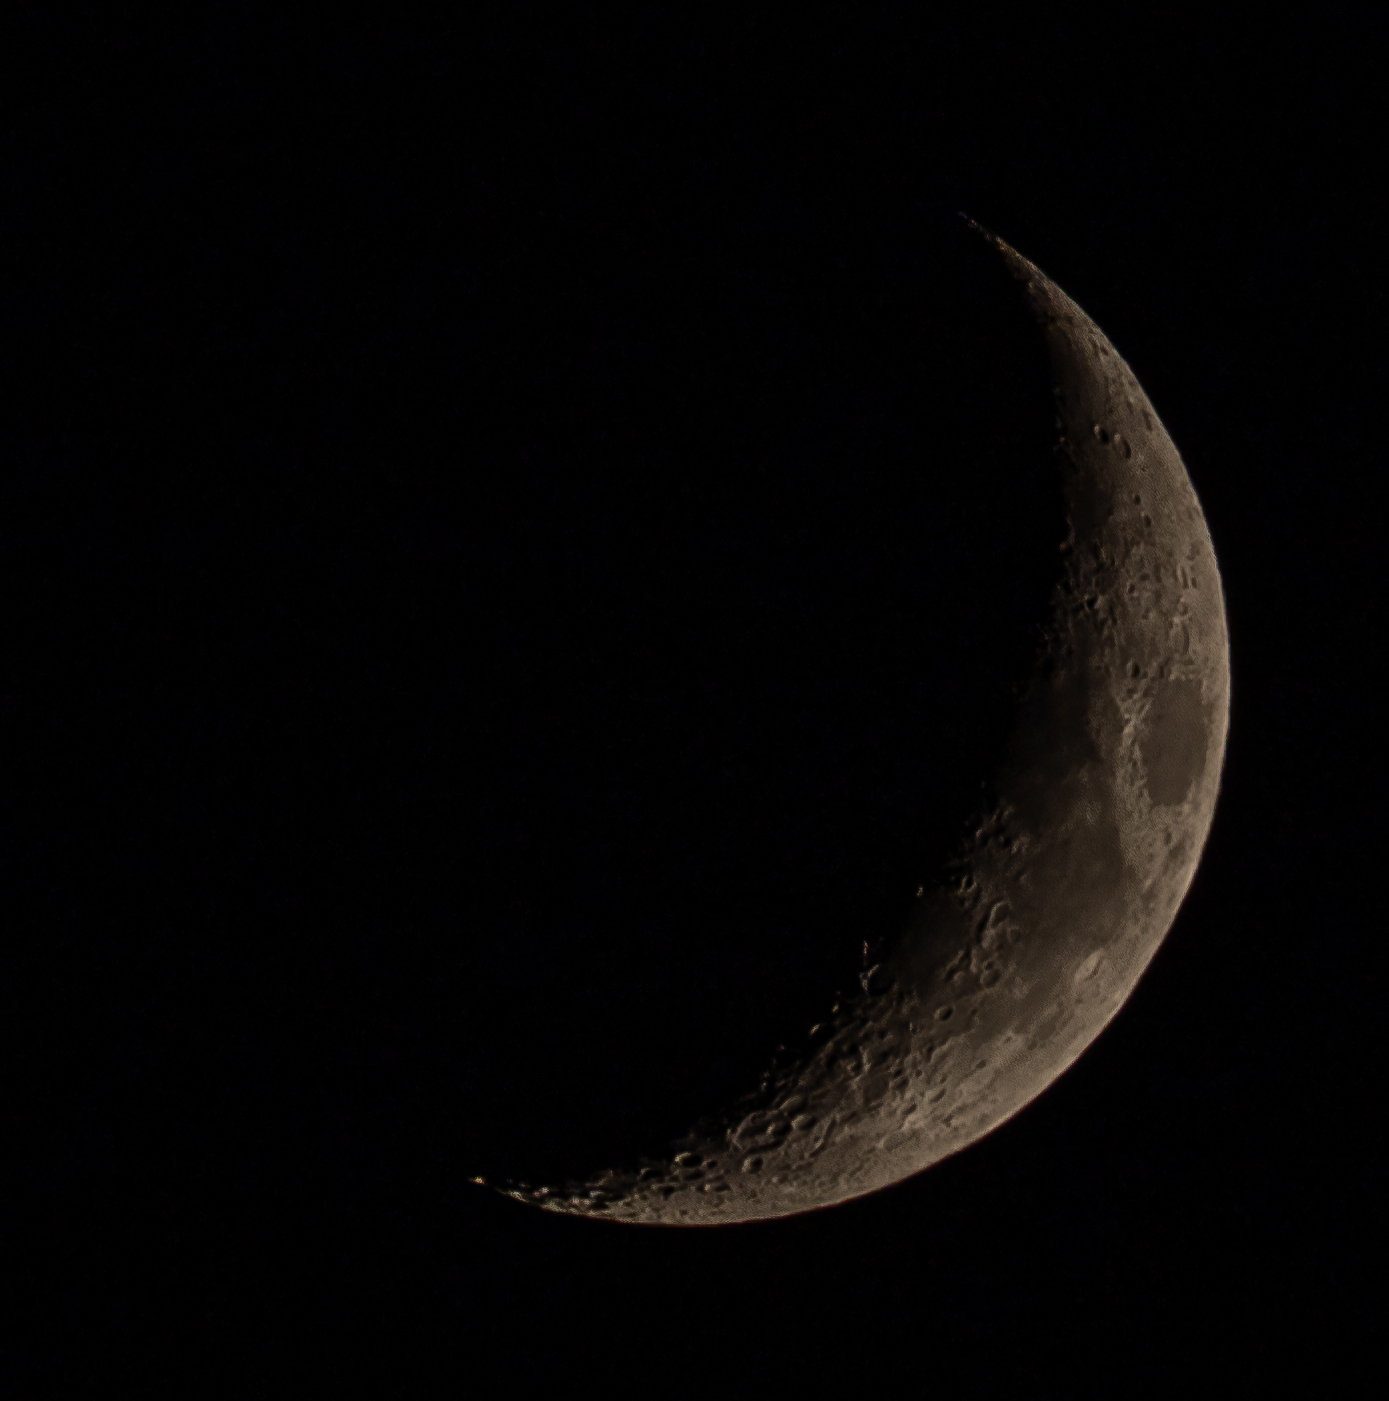 Quarter Moon from Formia (LT)...